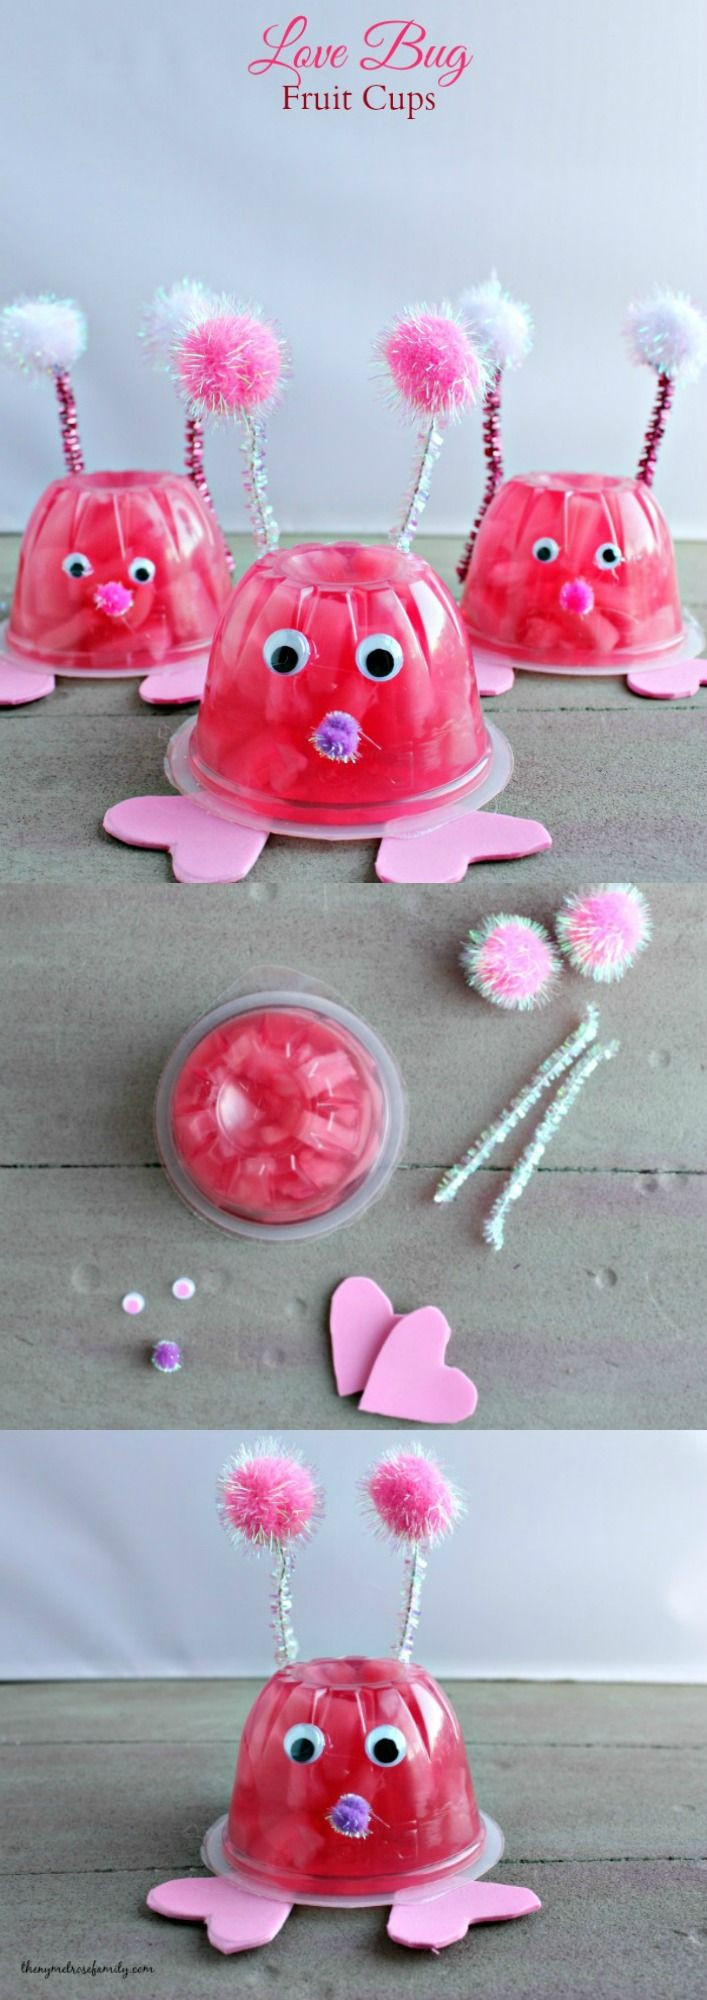 Classroom Valentine Gift Ideas
 Valentines Day Ideas for Kids Love Bug Fruit Cups